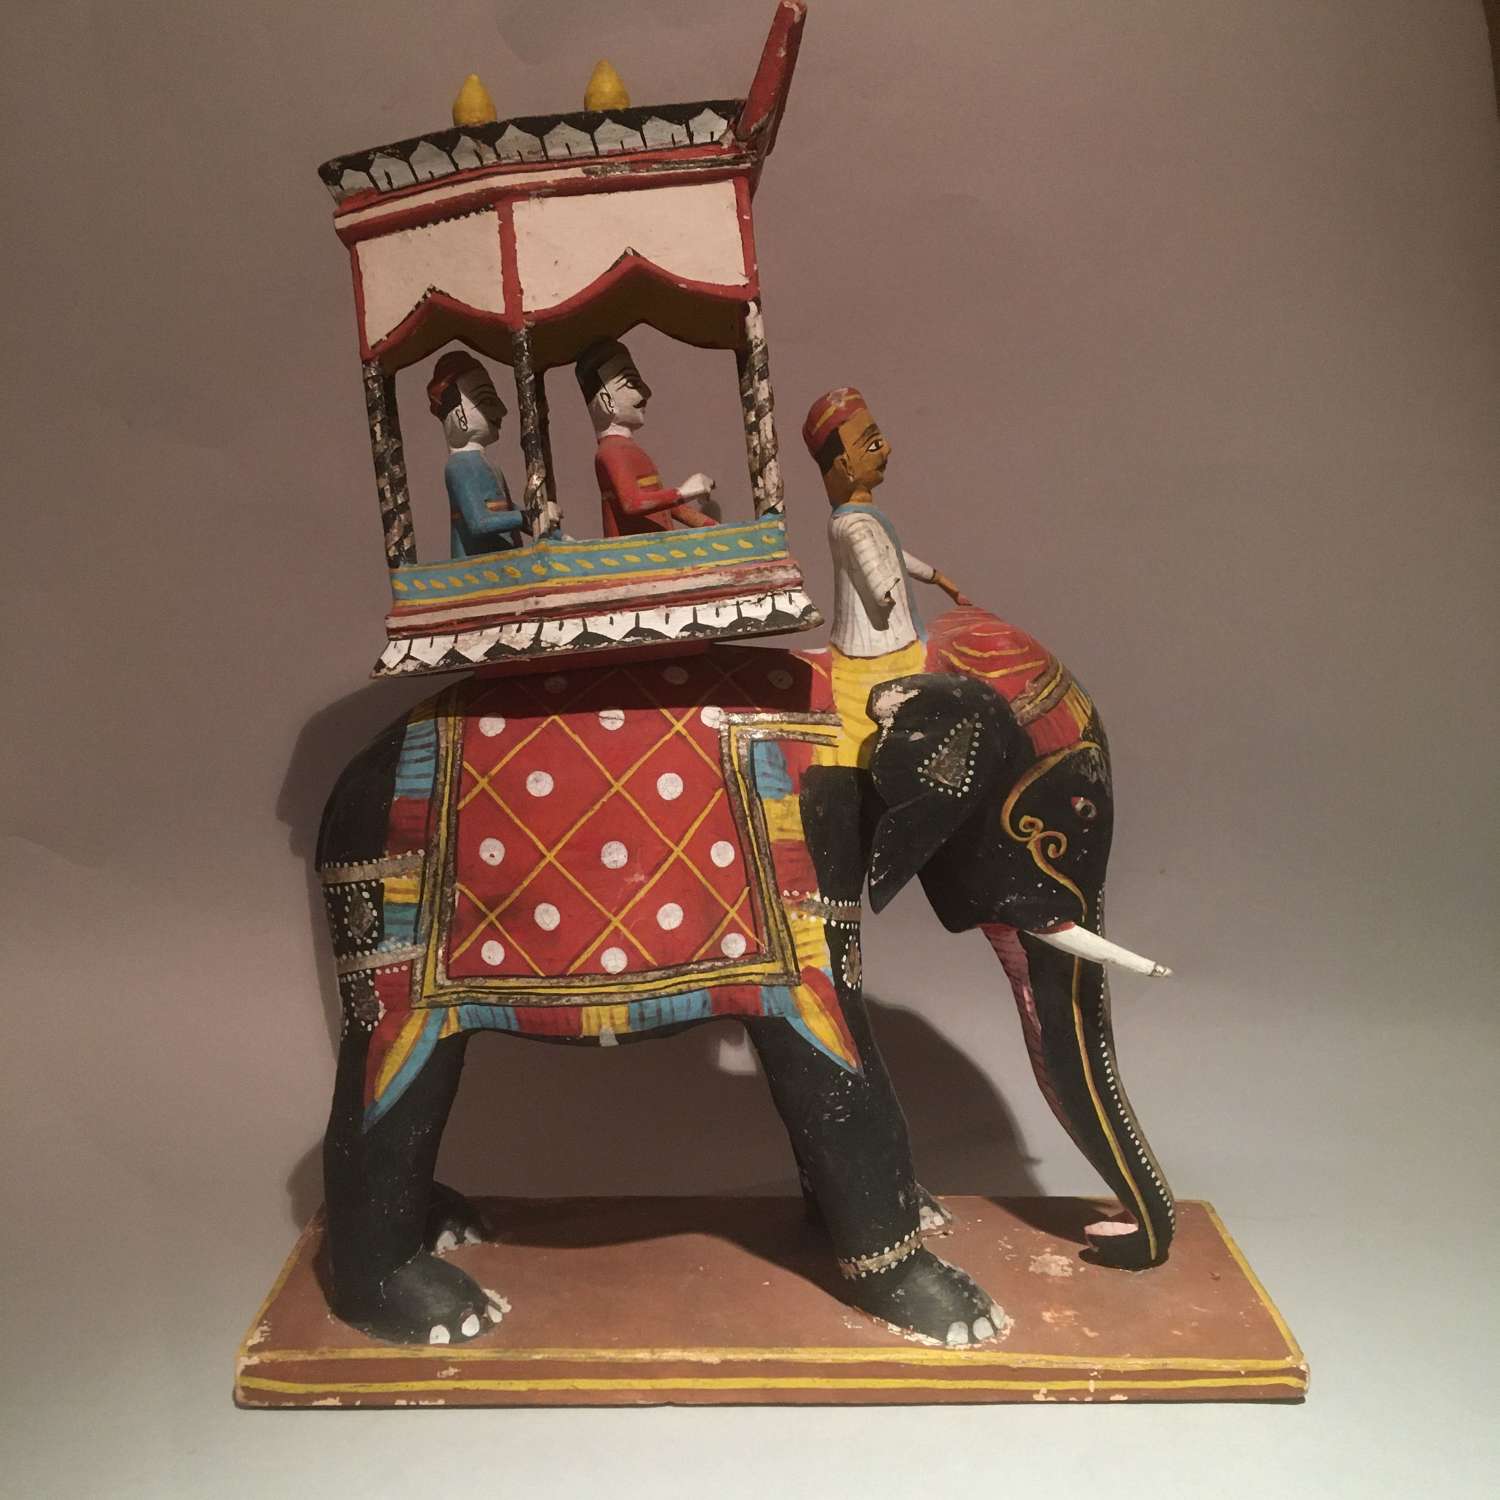 Carved Wood Model Elephant with Mahout, Howdah and Two Passengers